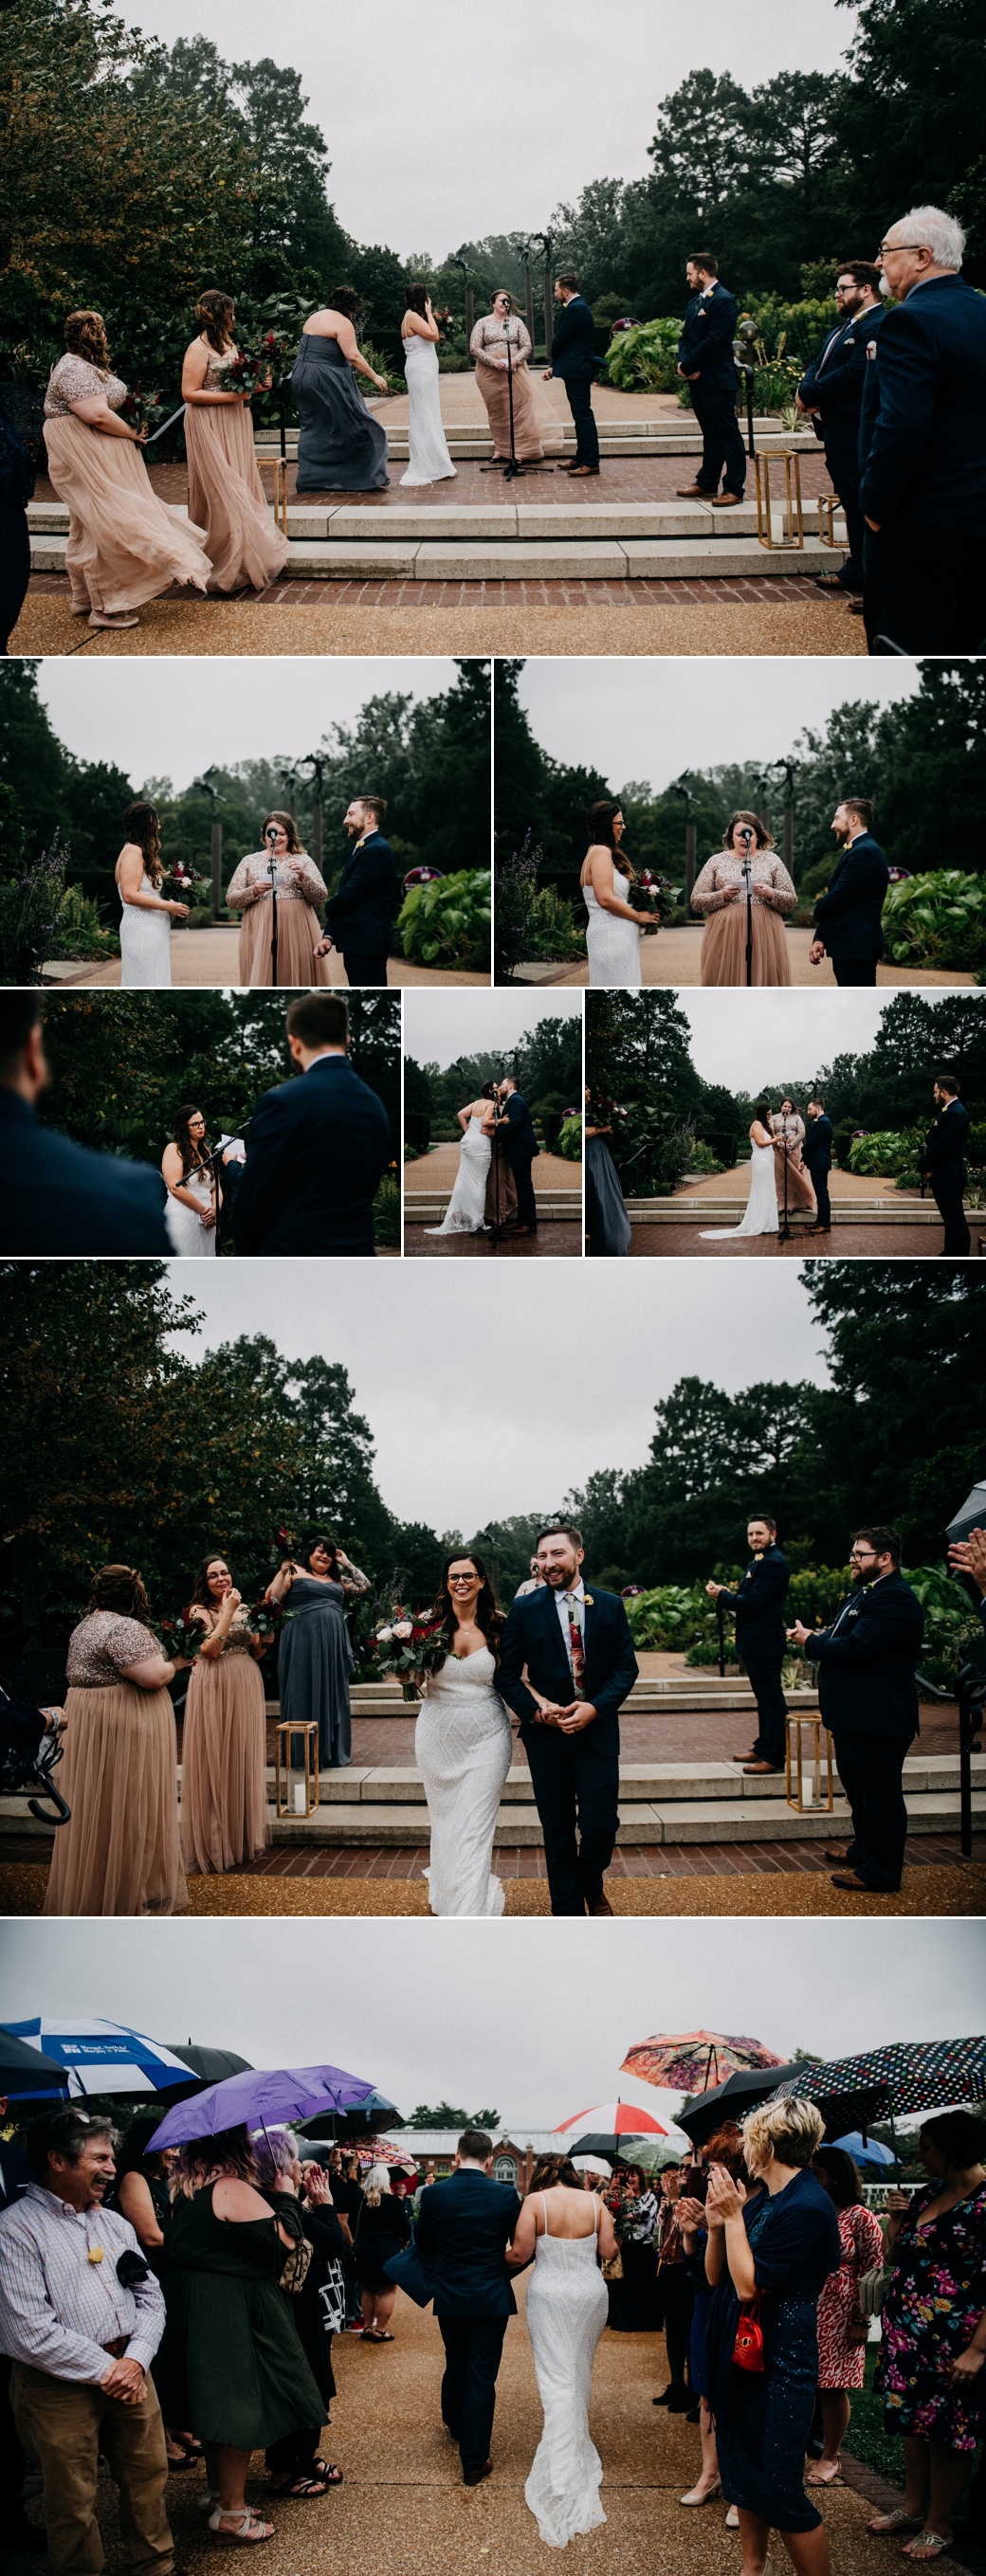 Collage of photos of guests holding umbrellas during a rainy day wedding ceremony at missouri botanical gardens in st Louis 